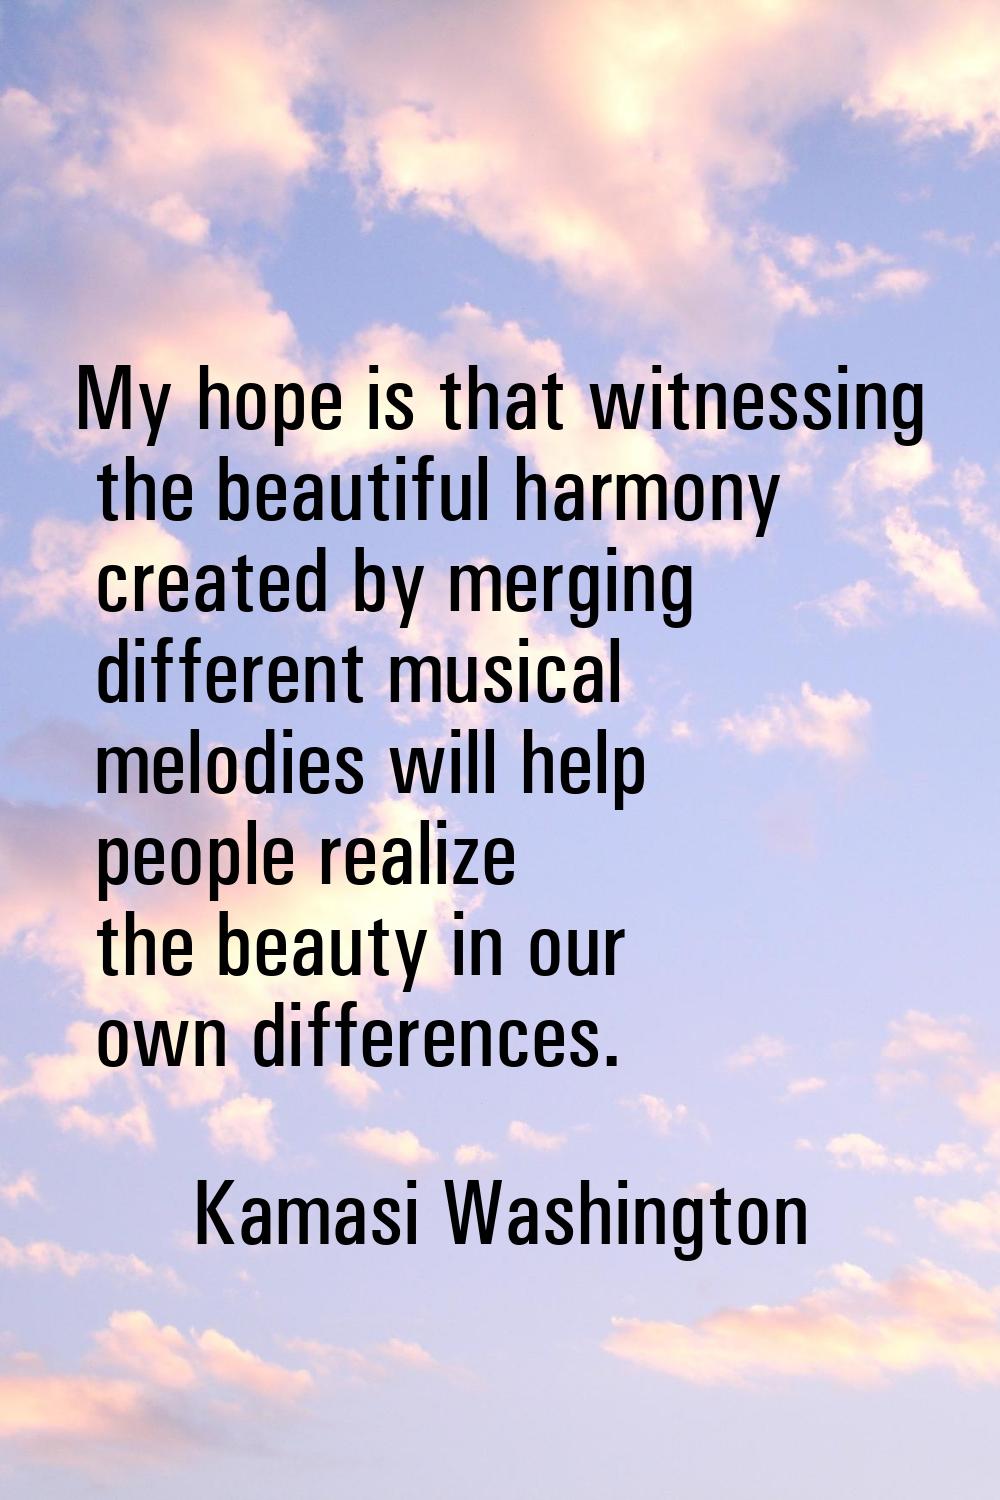 My hope is that witnessing the beautiful harmony created by merging different musical melodies will